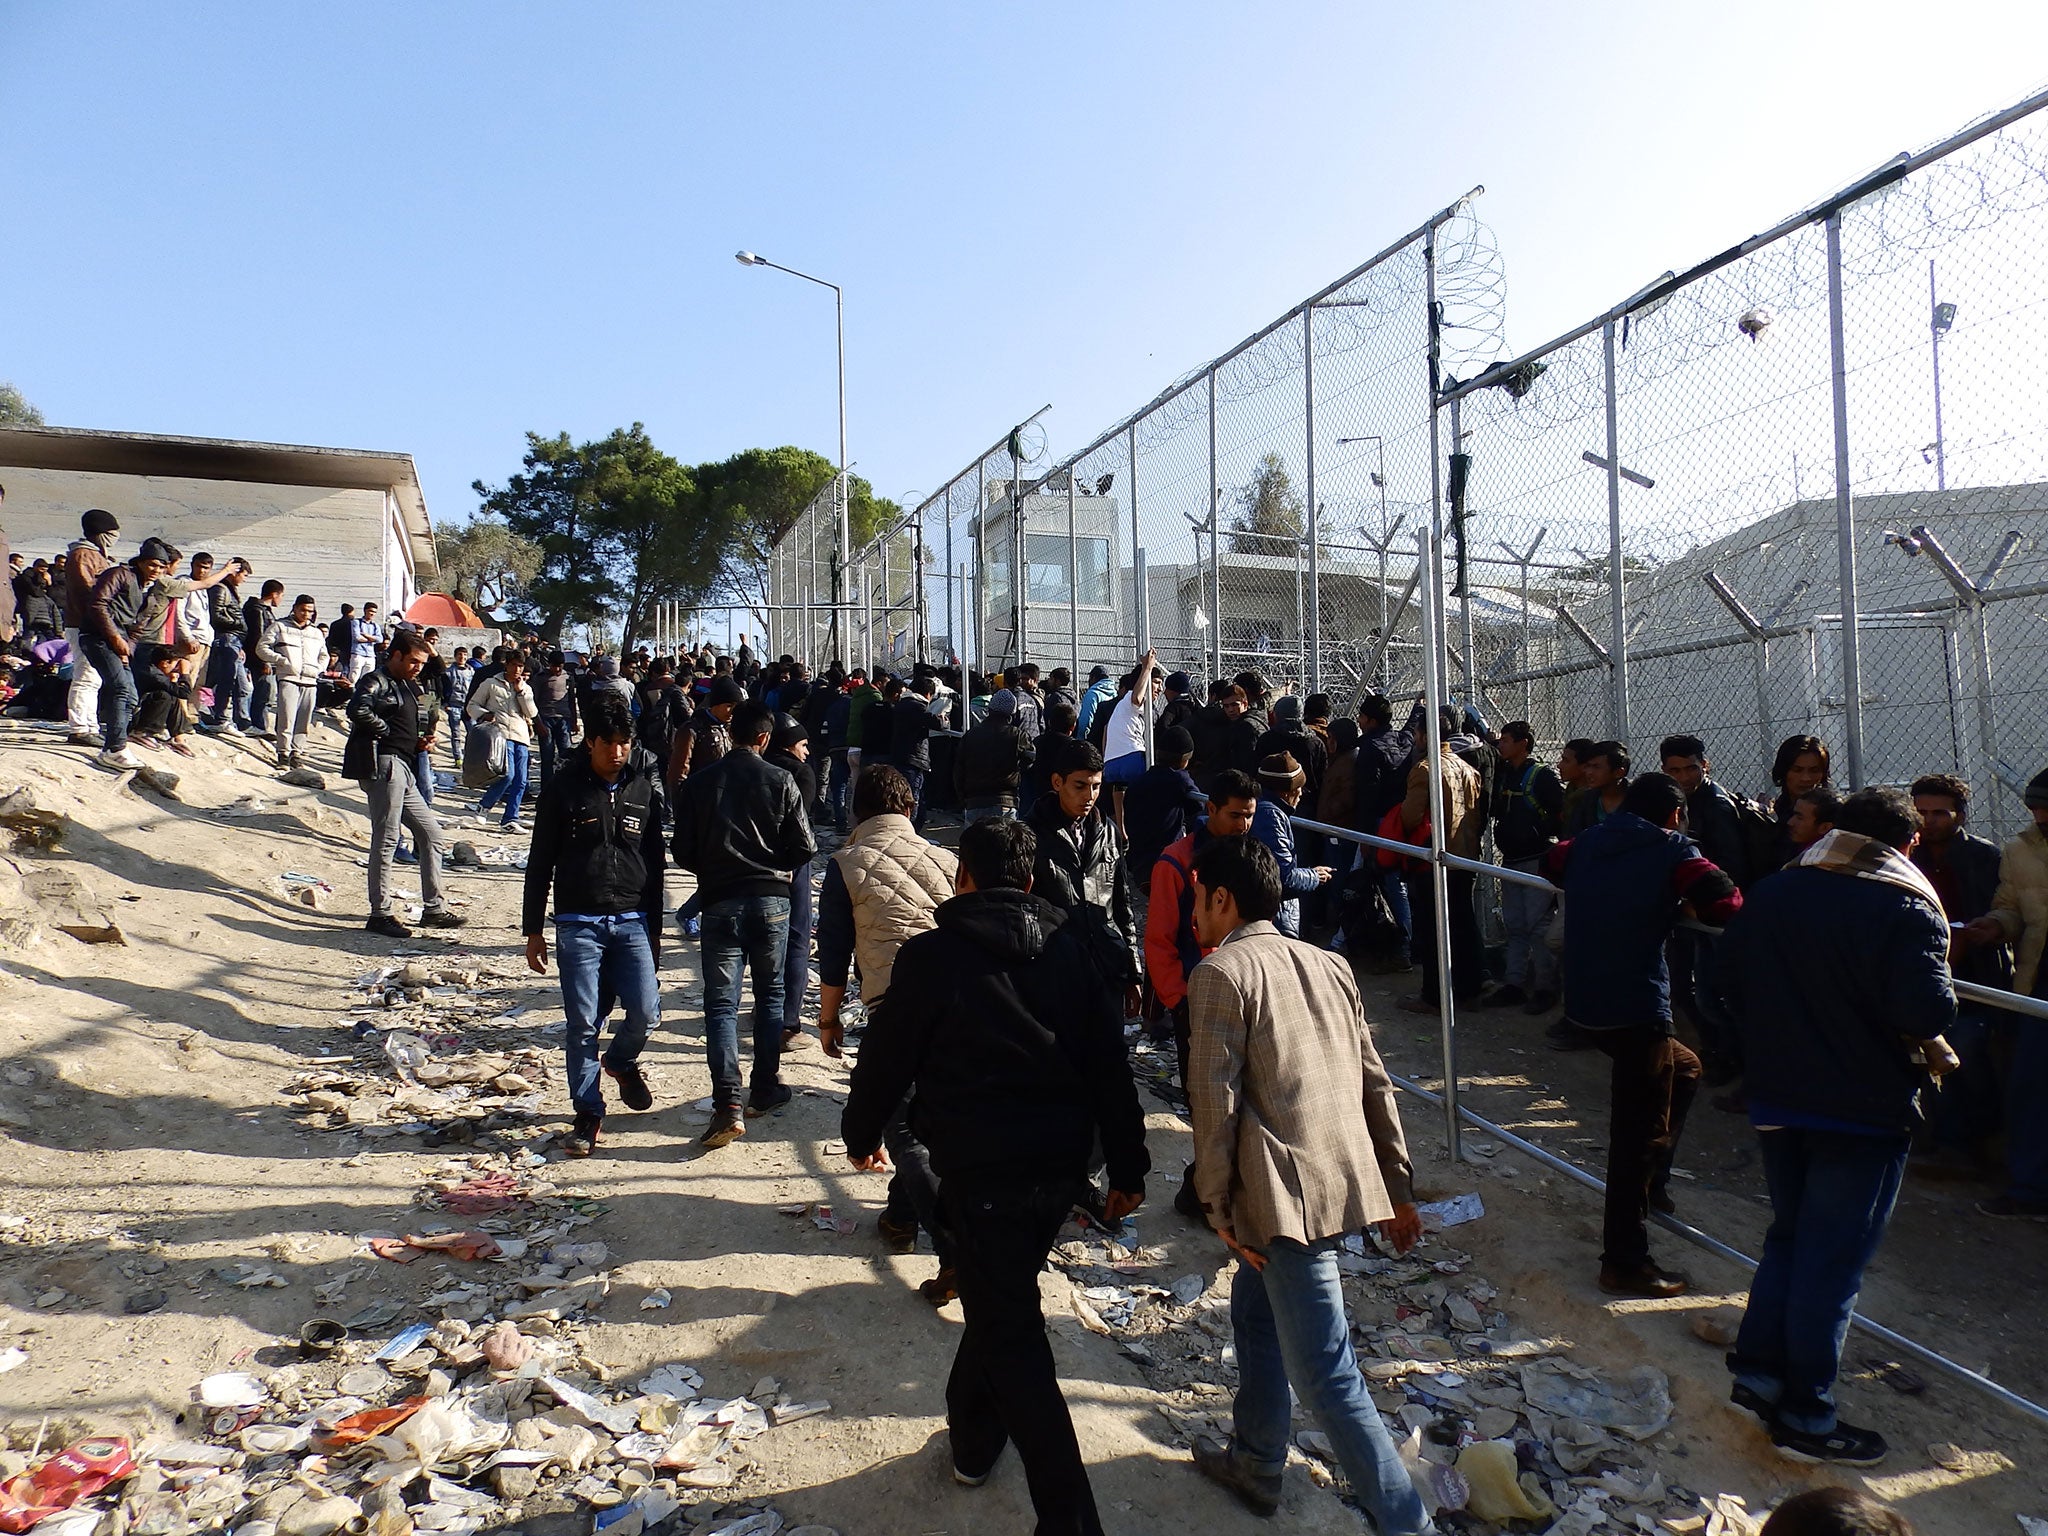 Asylum seekers queue to register at the Moria refugee camp in Lesbos, as numbers rose rapidly because of a backlog caused by a ferry strike trapping migrants on the island